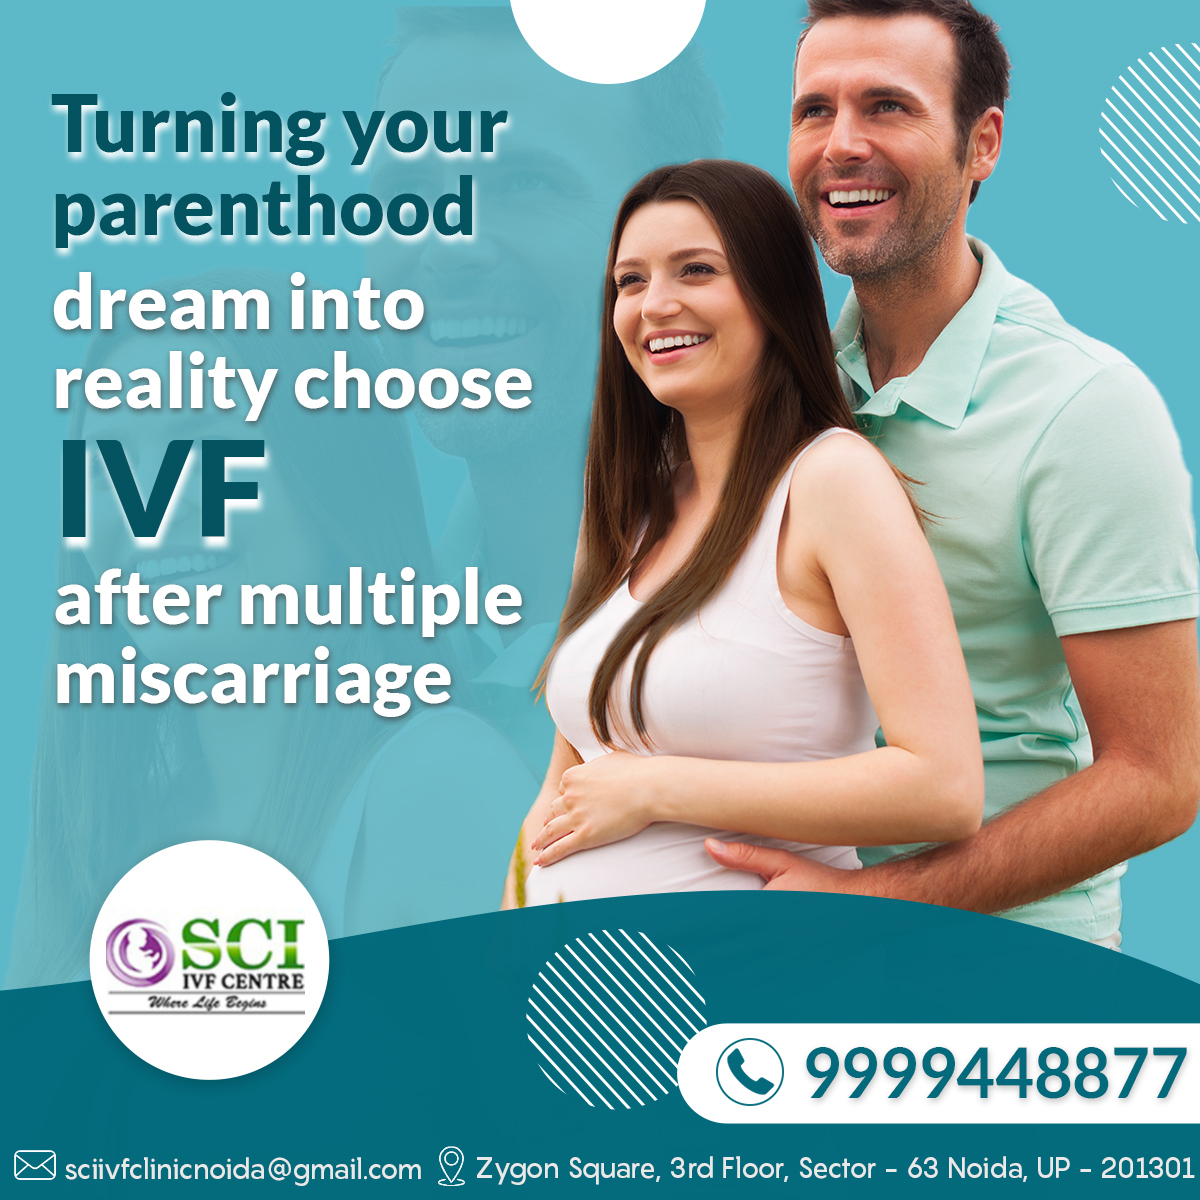 If you have faced multiple miscarriages and want to turn your parenthood dream into reality, choosing #IVF may be a viable option.

Call to Experts:  0120-4318757, 099994 48877

#ivfcost #ivfsuccessrate #sciivfhospital #drnupurgarg  #parenthood #sciivfcentre #sciivfcentrenoida